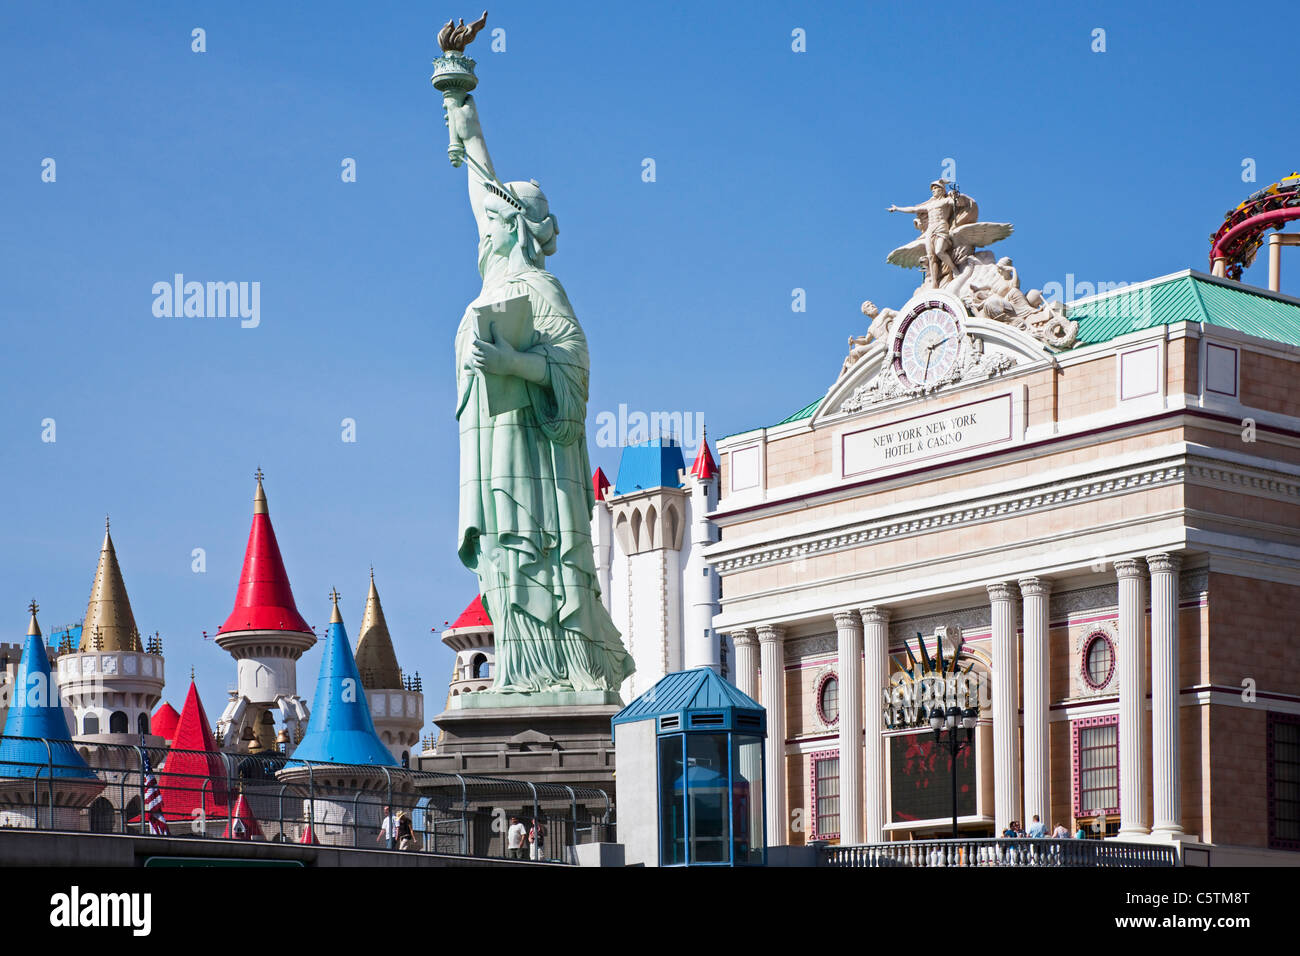 USA, Las Vegas, Hotel New York with liberty statue in foreground Stock Photo